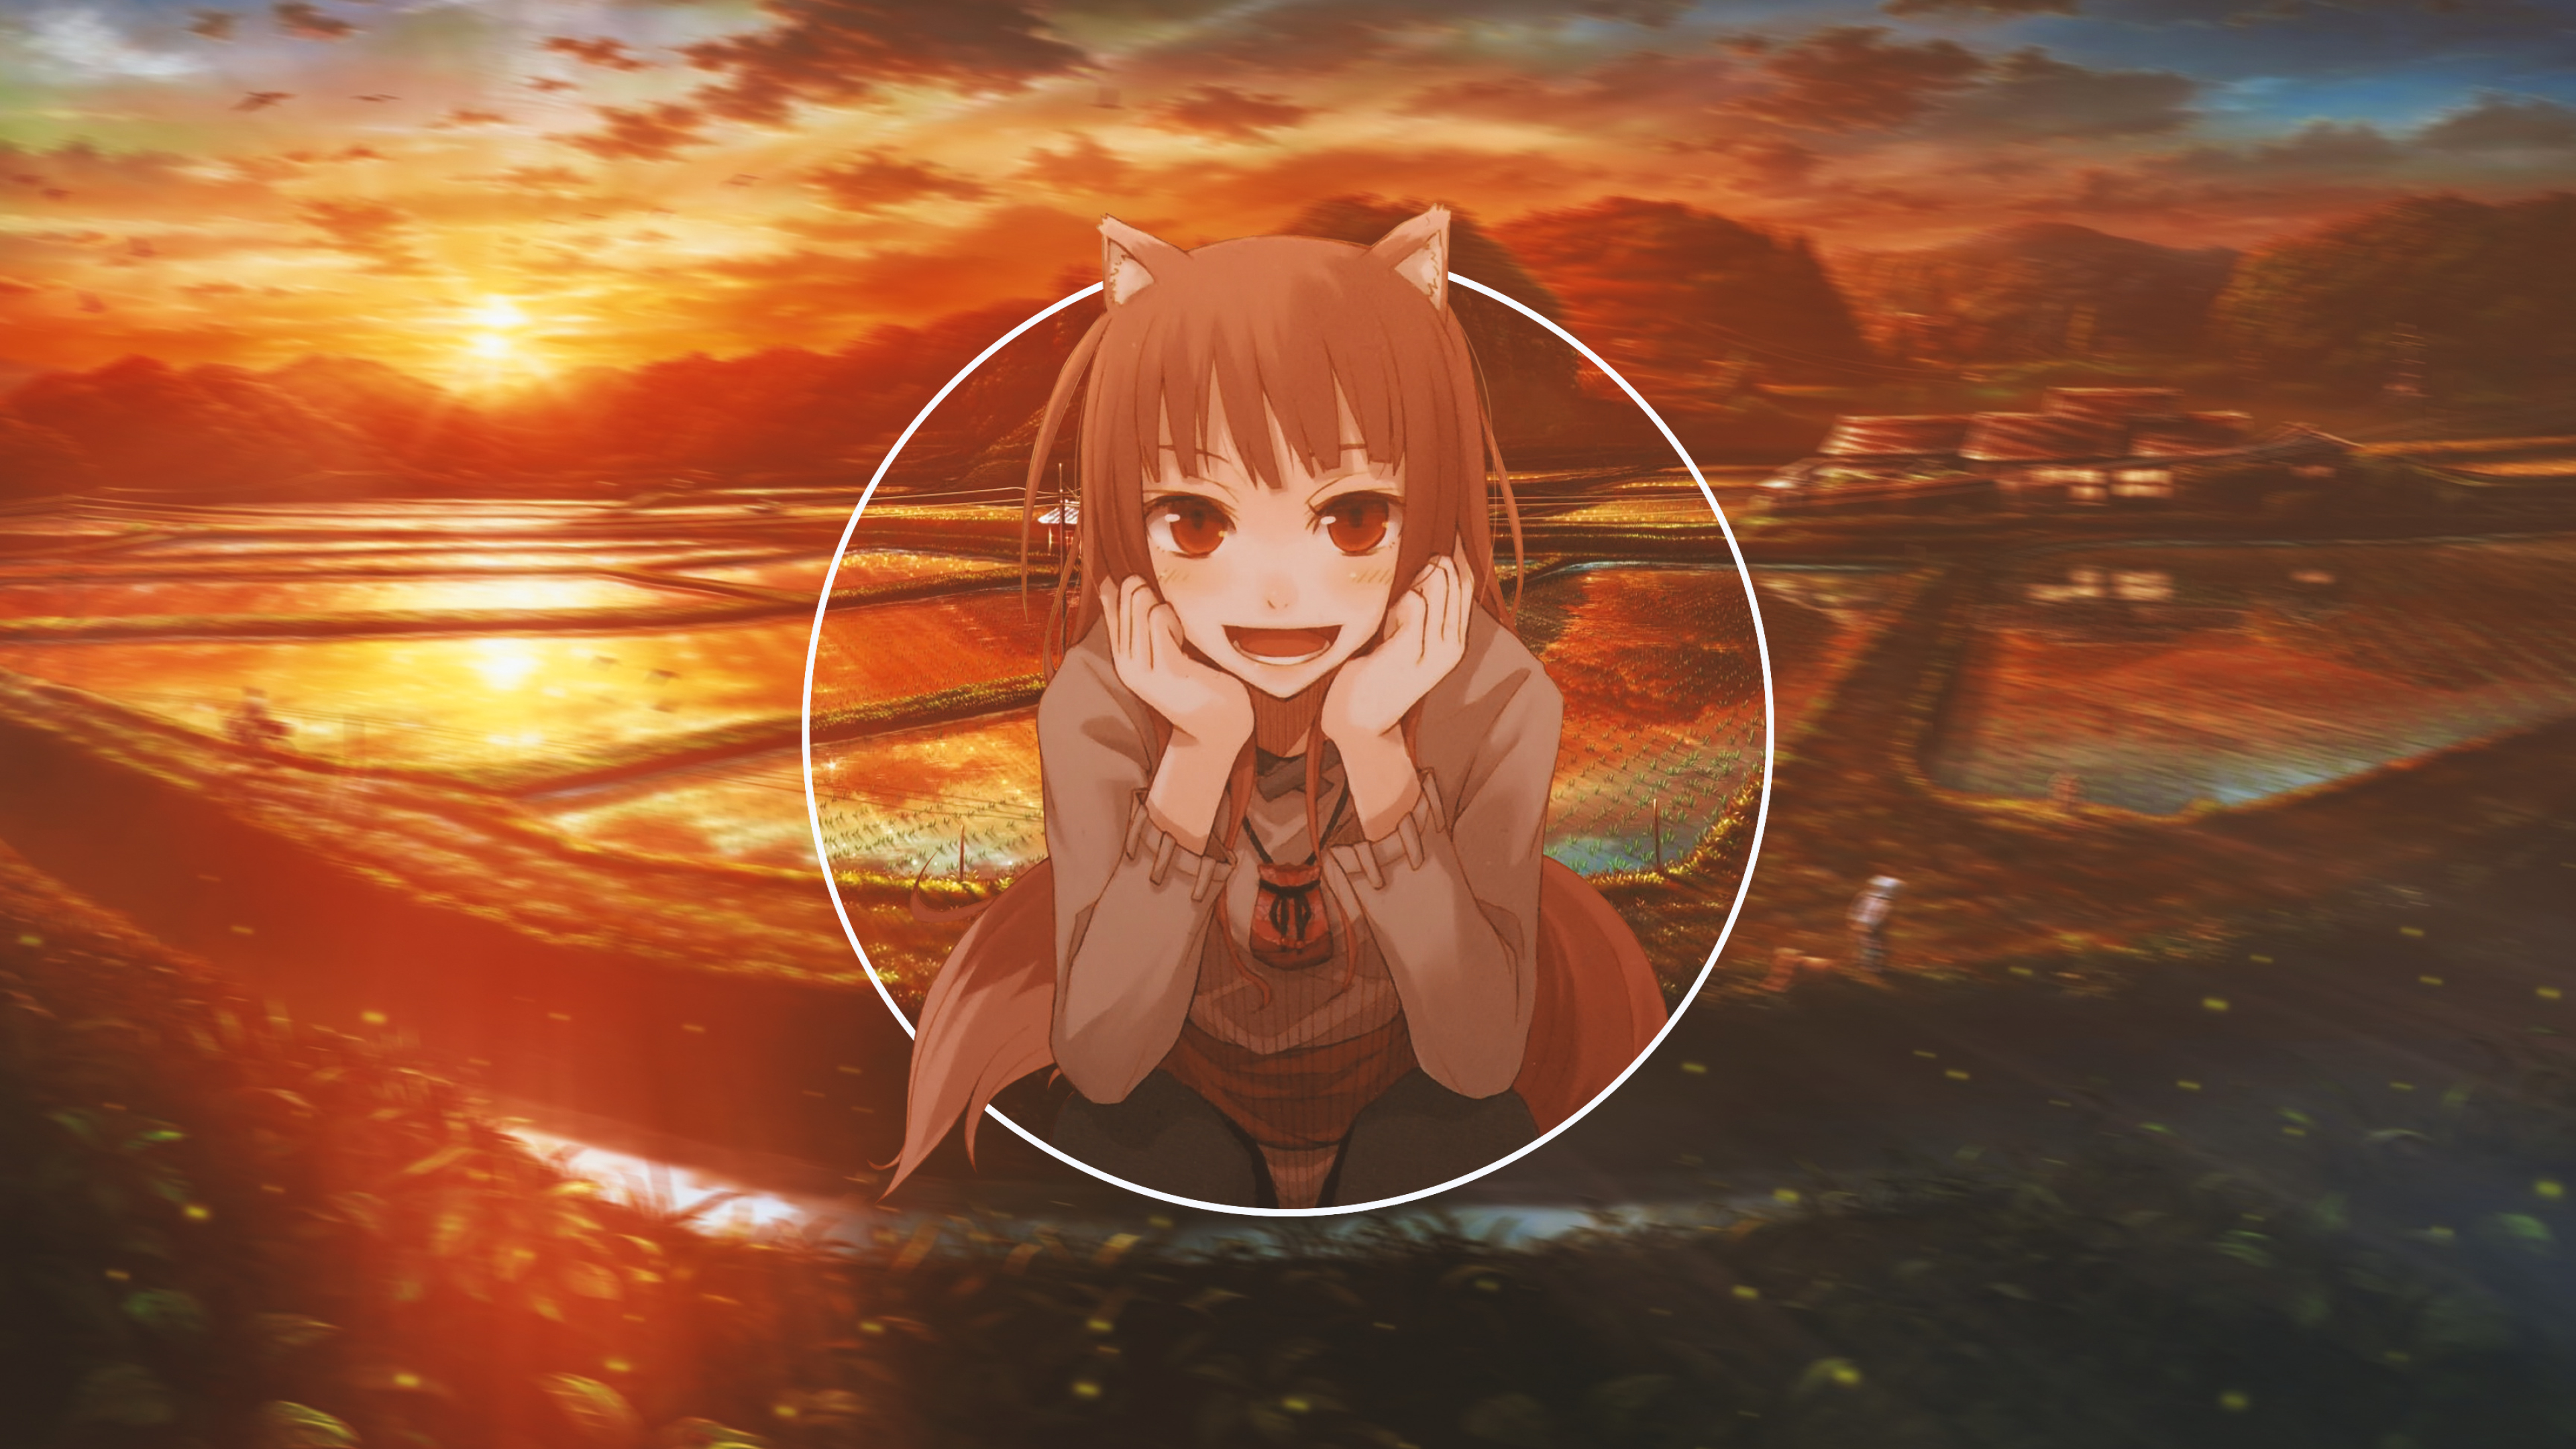 Spice and Wolf (Anime): Artwork, The village's wheat goddess. 3840x2160 4K Wallpaper.